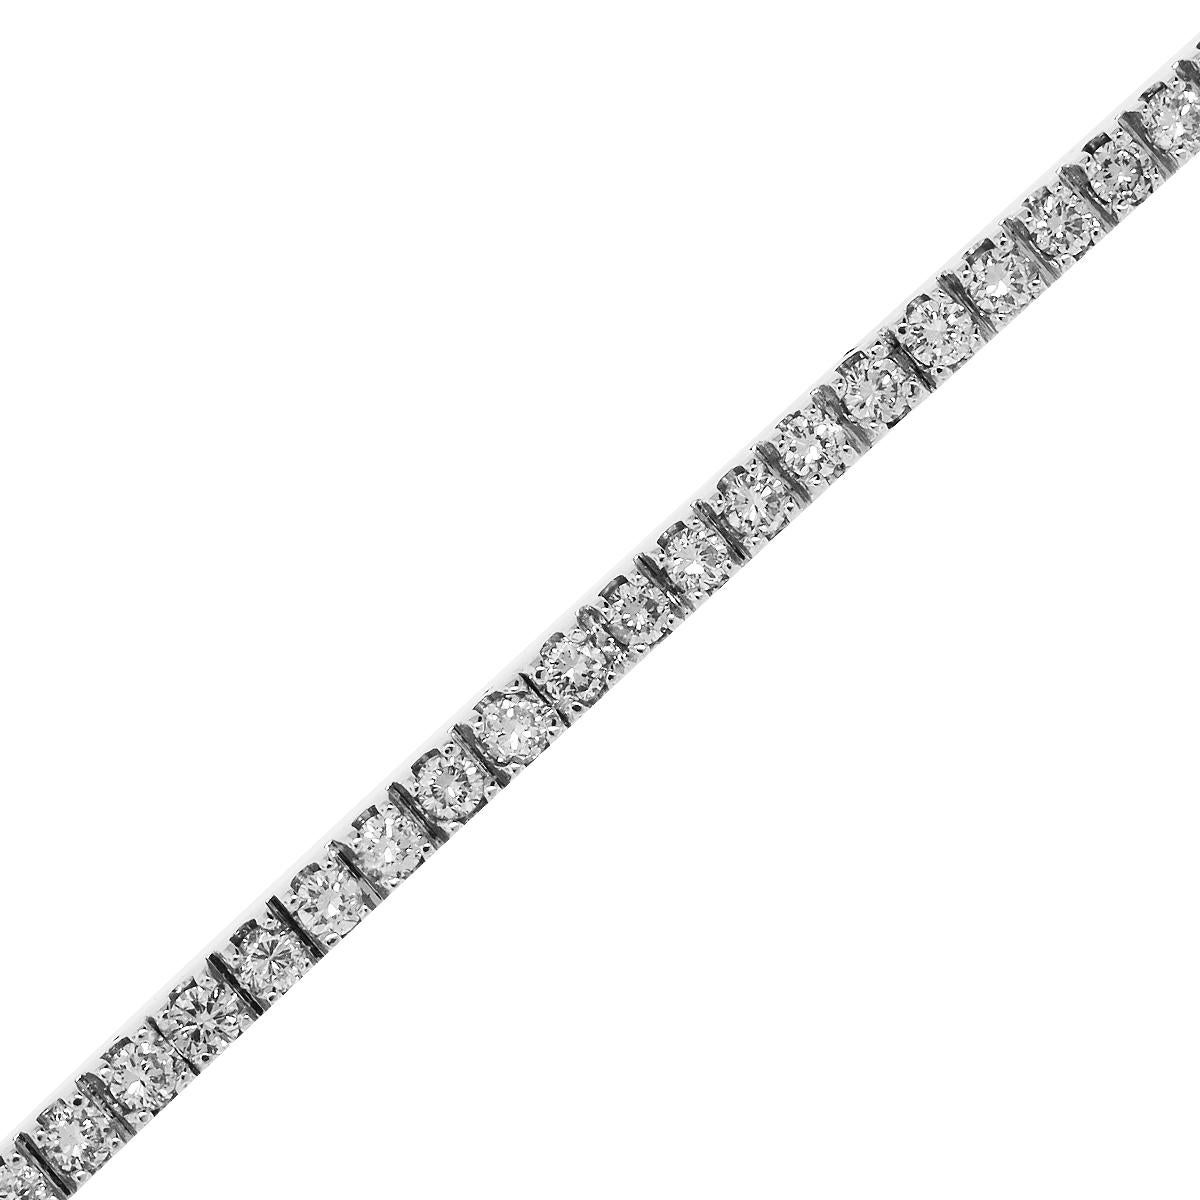 Material: 18k White Gold
Diamond Details: Approximately 2.18ctw round brilliant diamonds. Diamonds are G/H in color and VS in clarity.
Measurements: 7″
Clasp: Tongue in box clasp with safety latch
Total Weight: 12.9g (8.3dwt)
SKU: A30312874